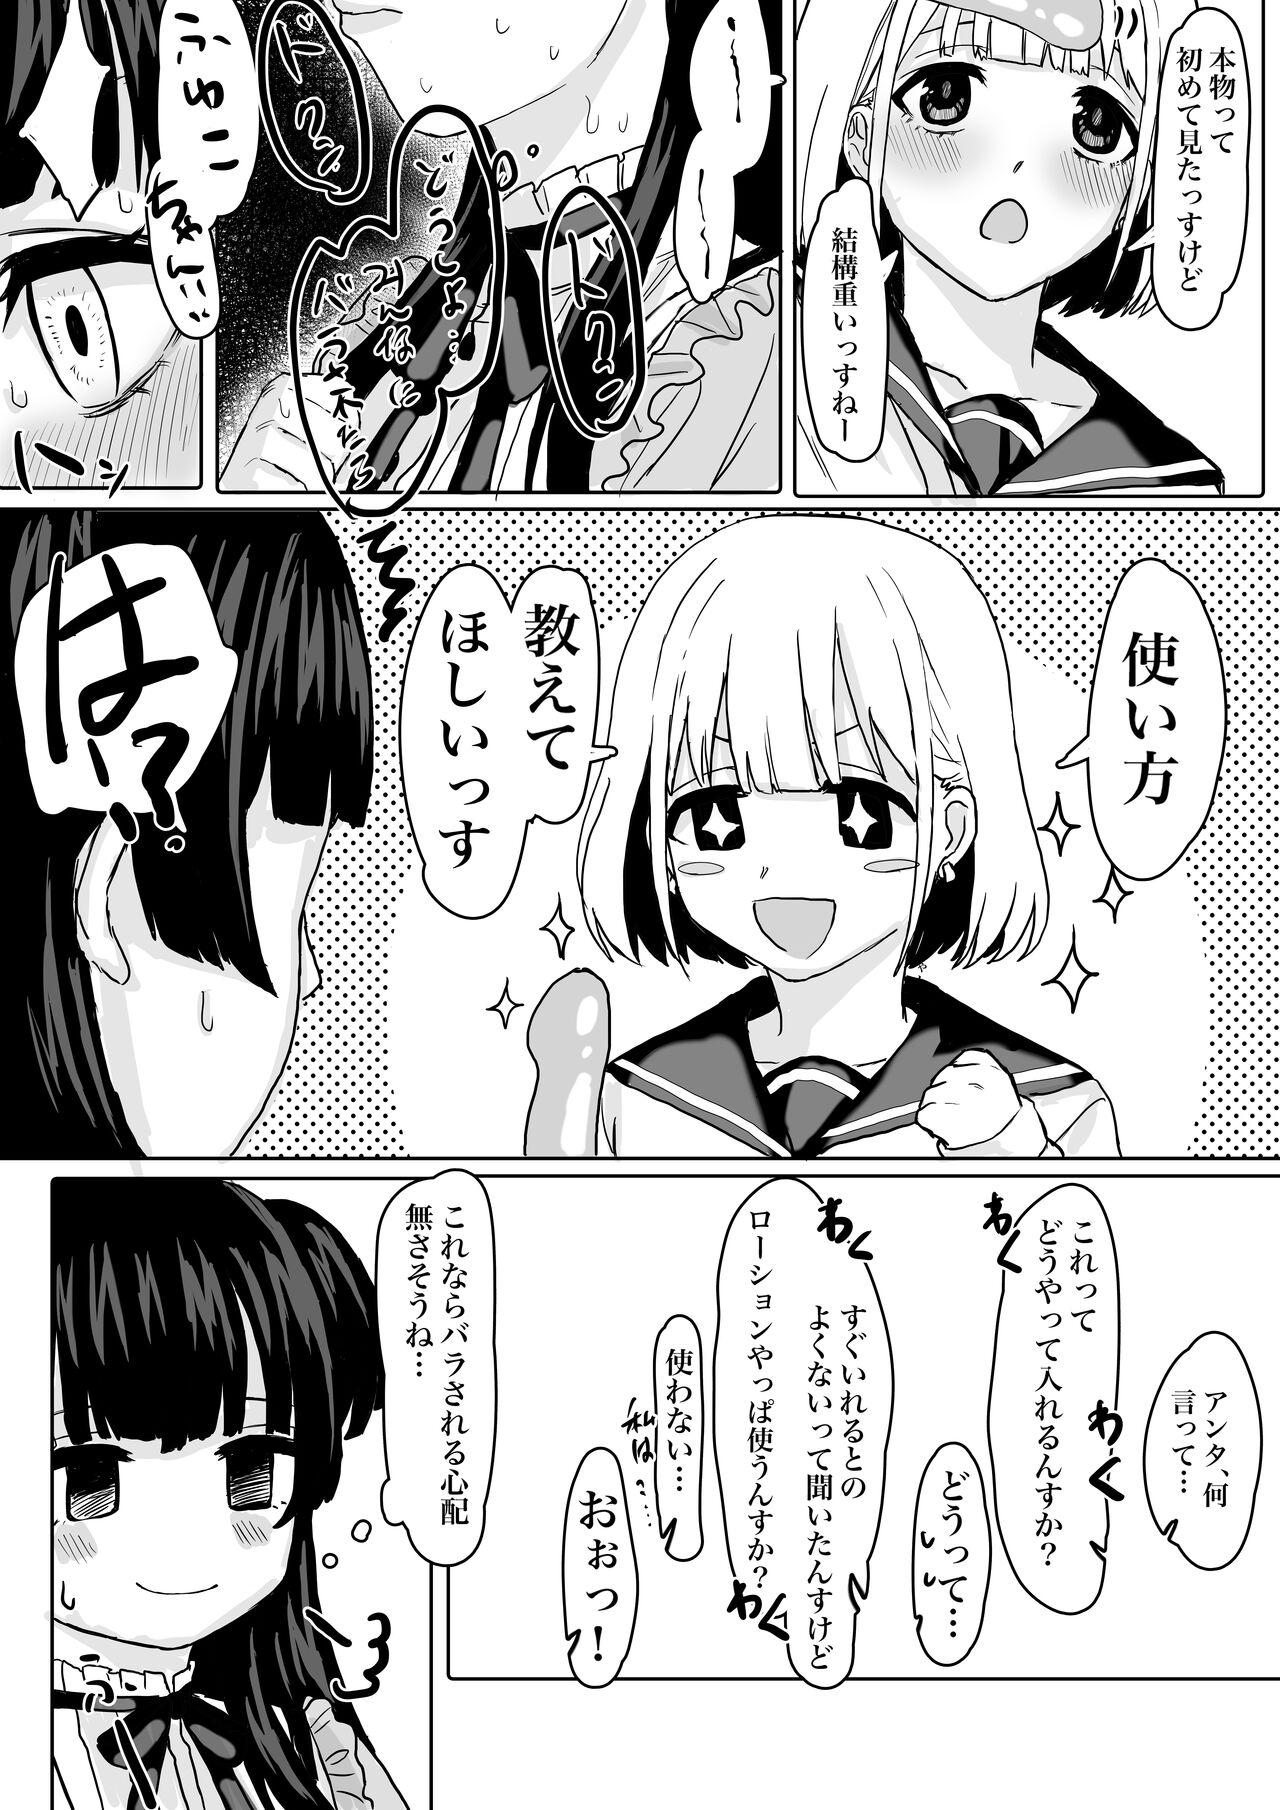 Foursome 「教えてほしいっす！」ふゆあさ百合 - The idolmaster Maid - Page 4